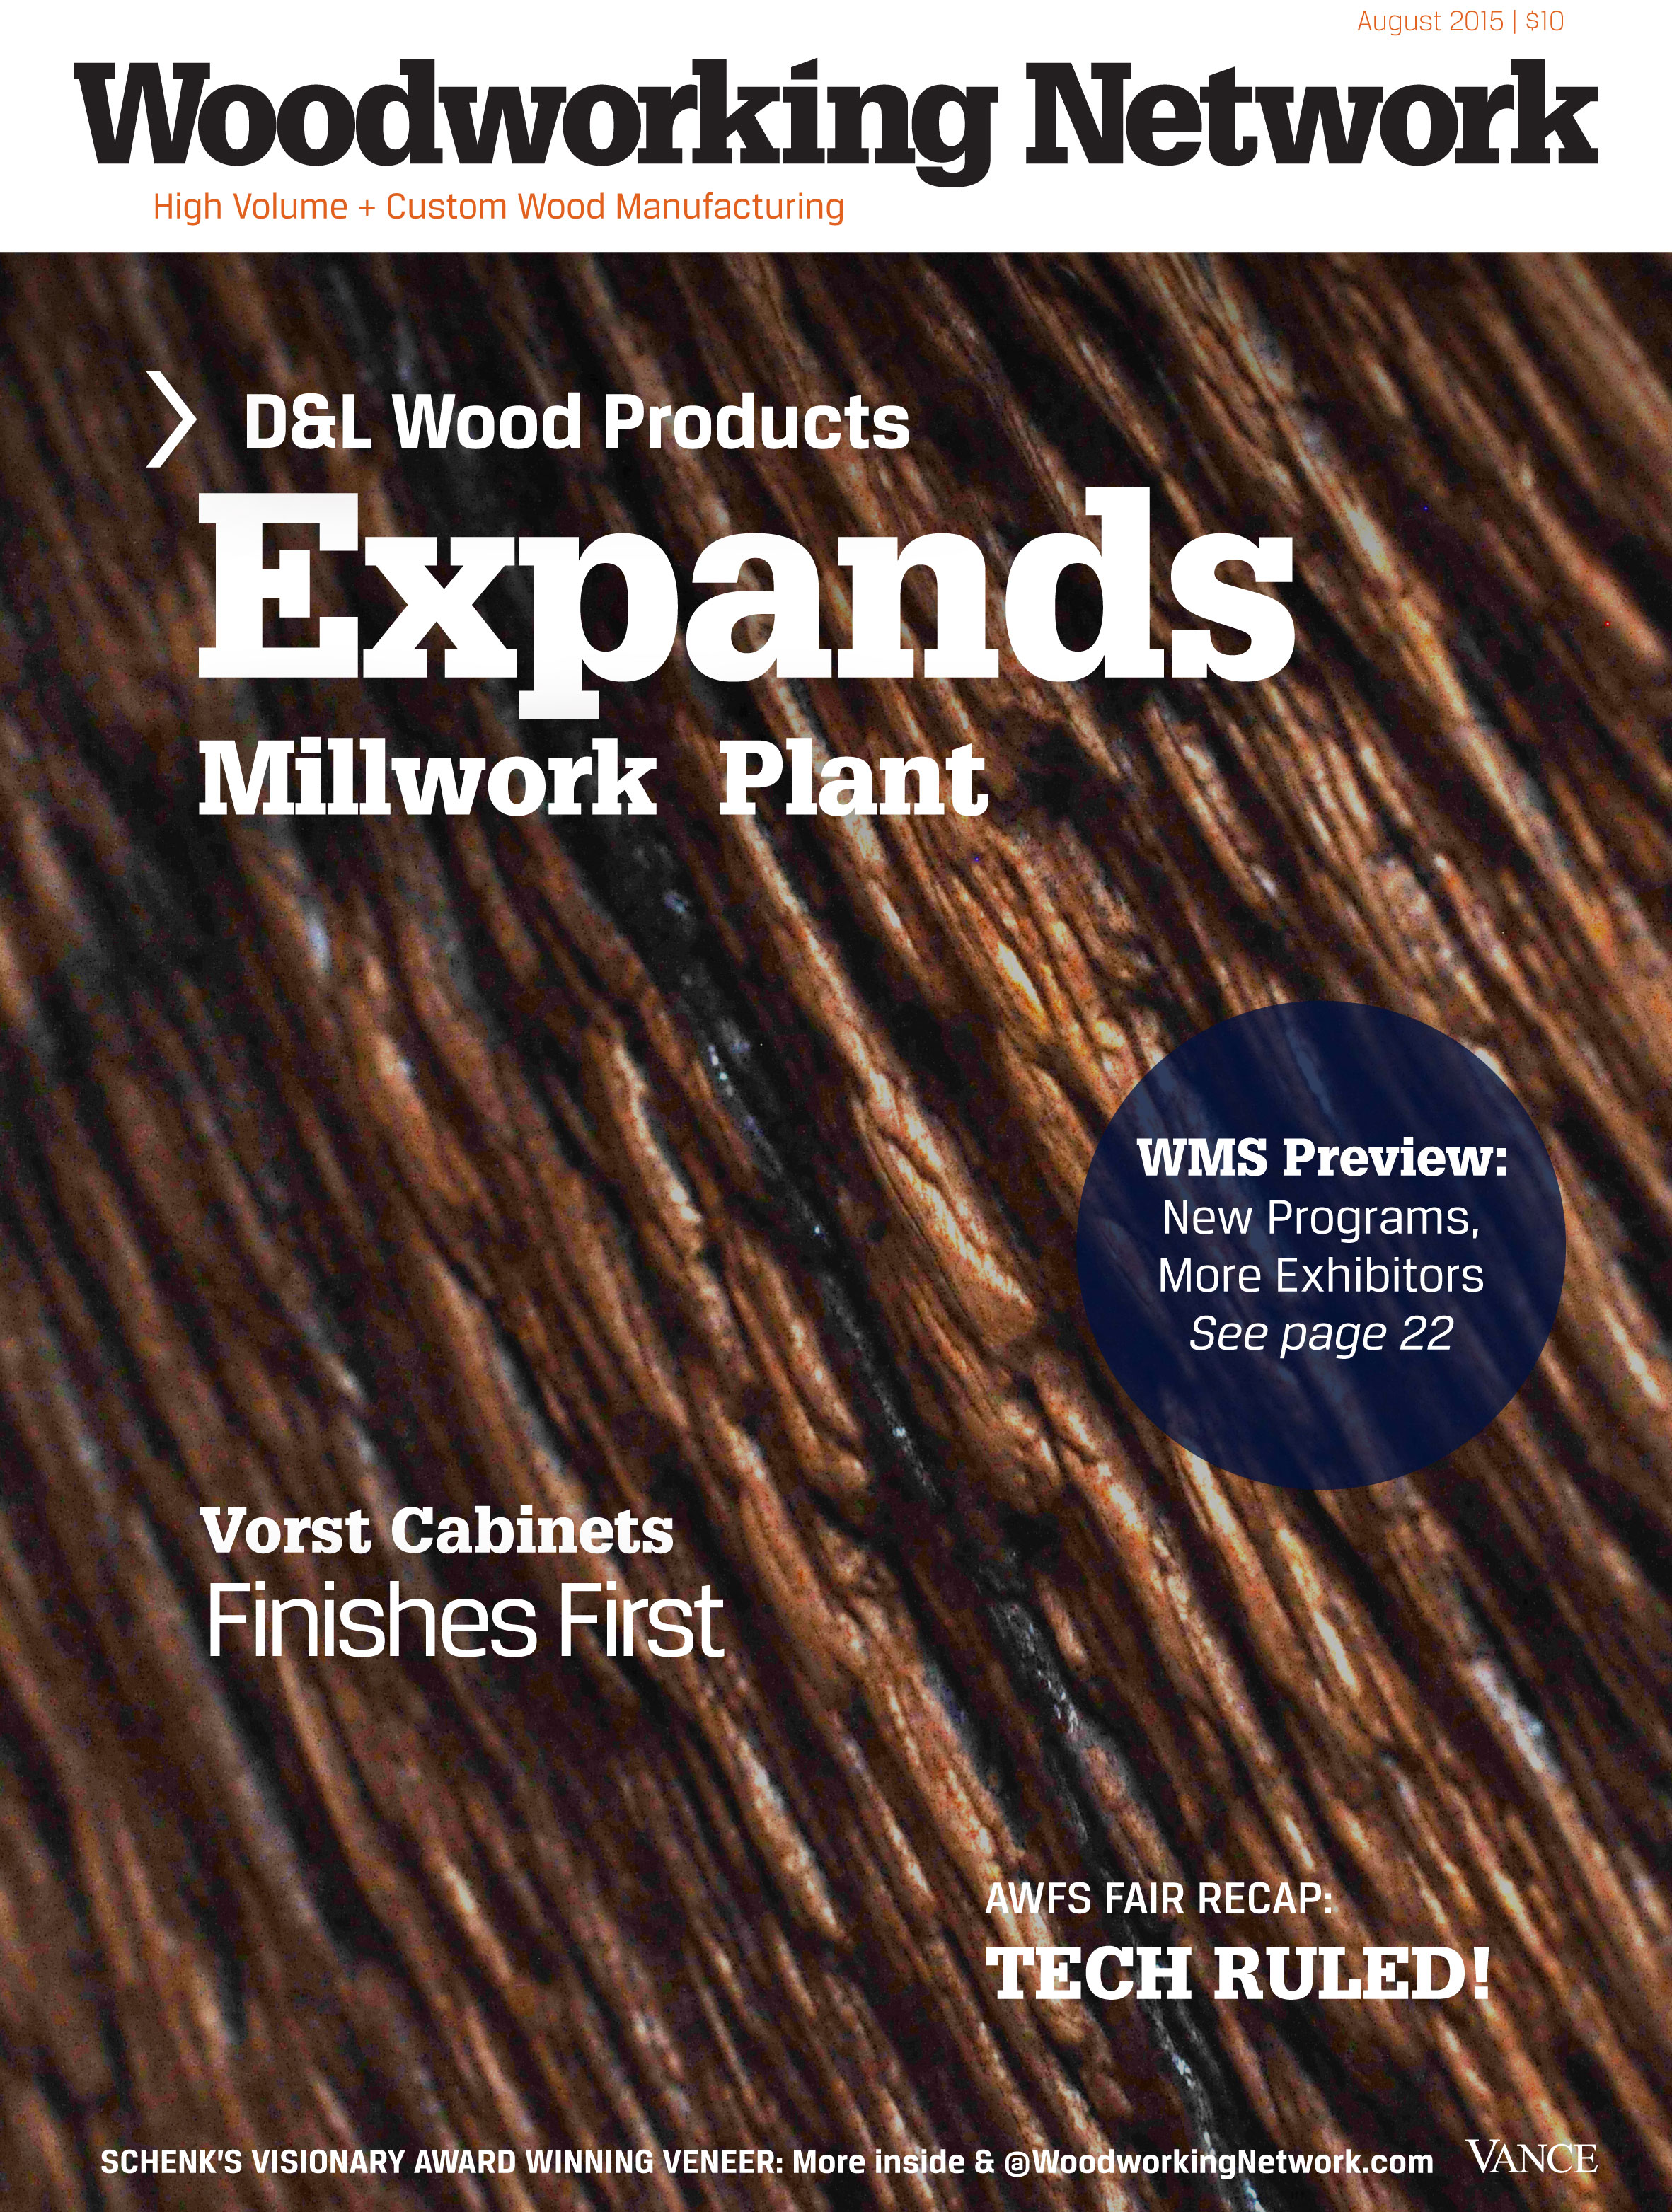 Woodworking Network August 2015 | Woodworking Network